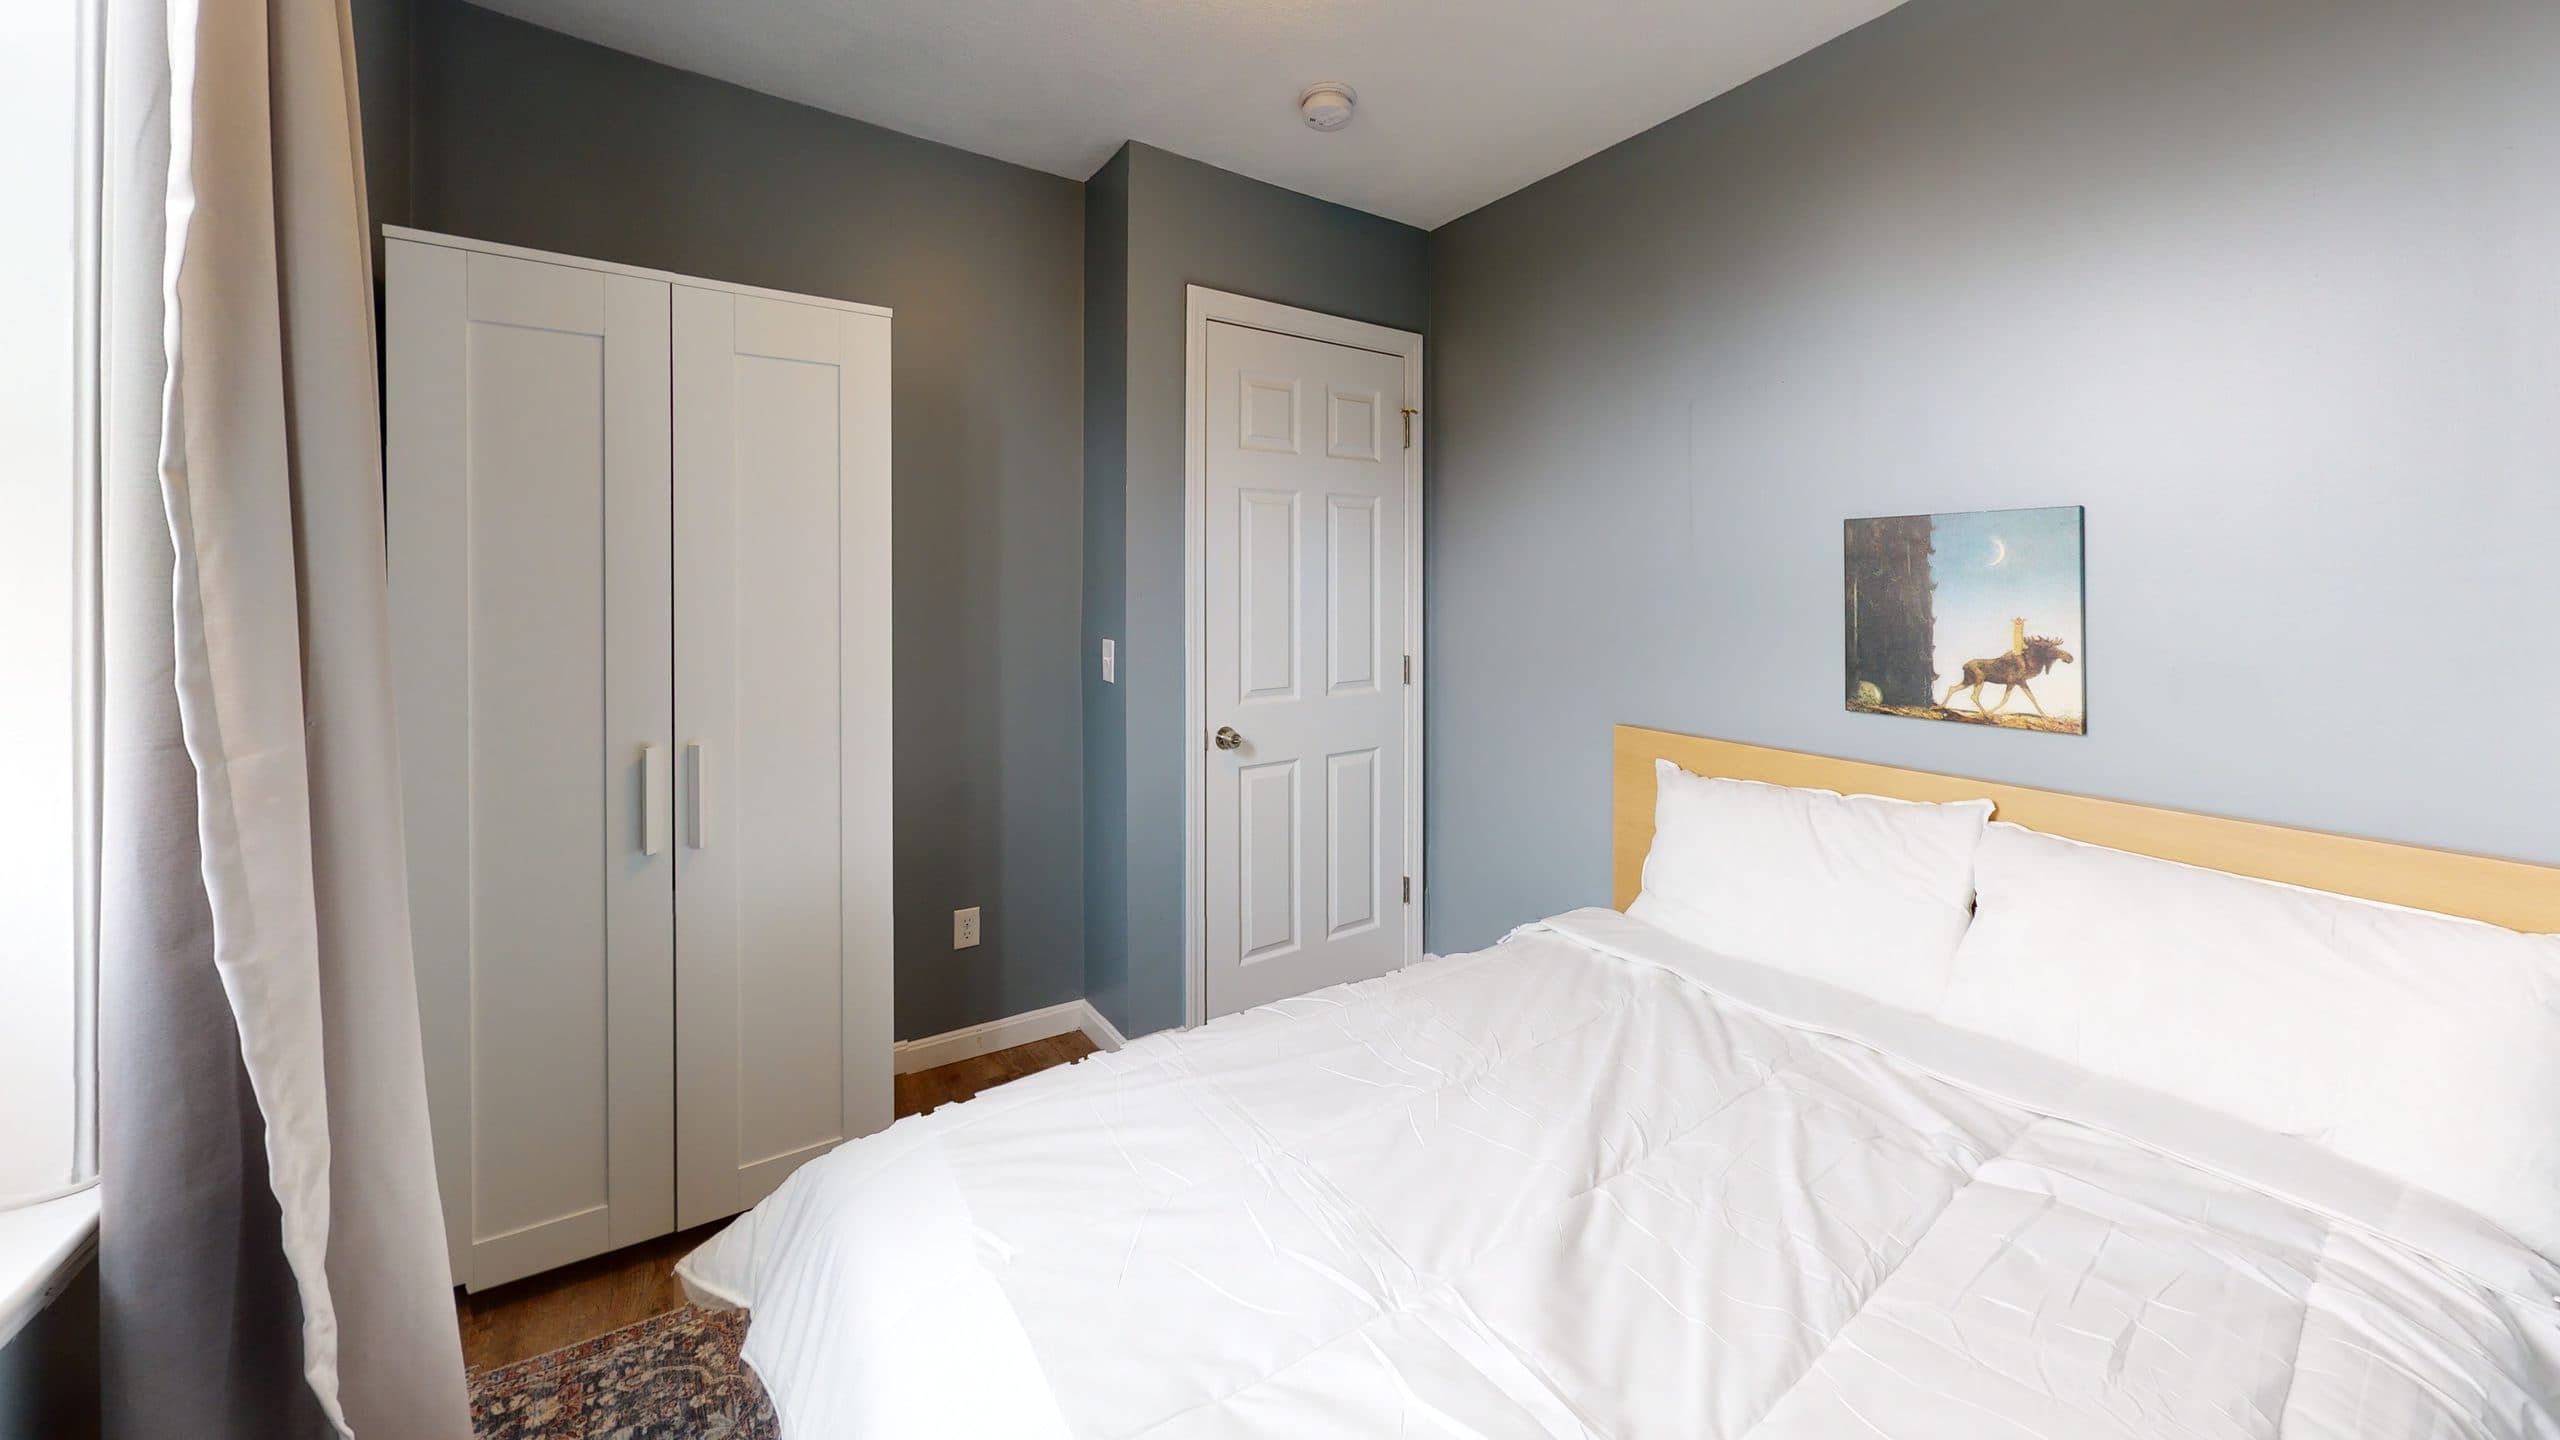 Photo 11 of #1281: Queen Bedroom A at June Homes